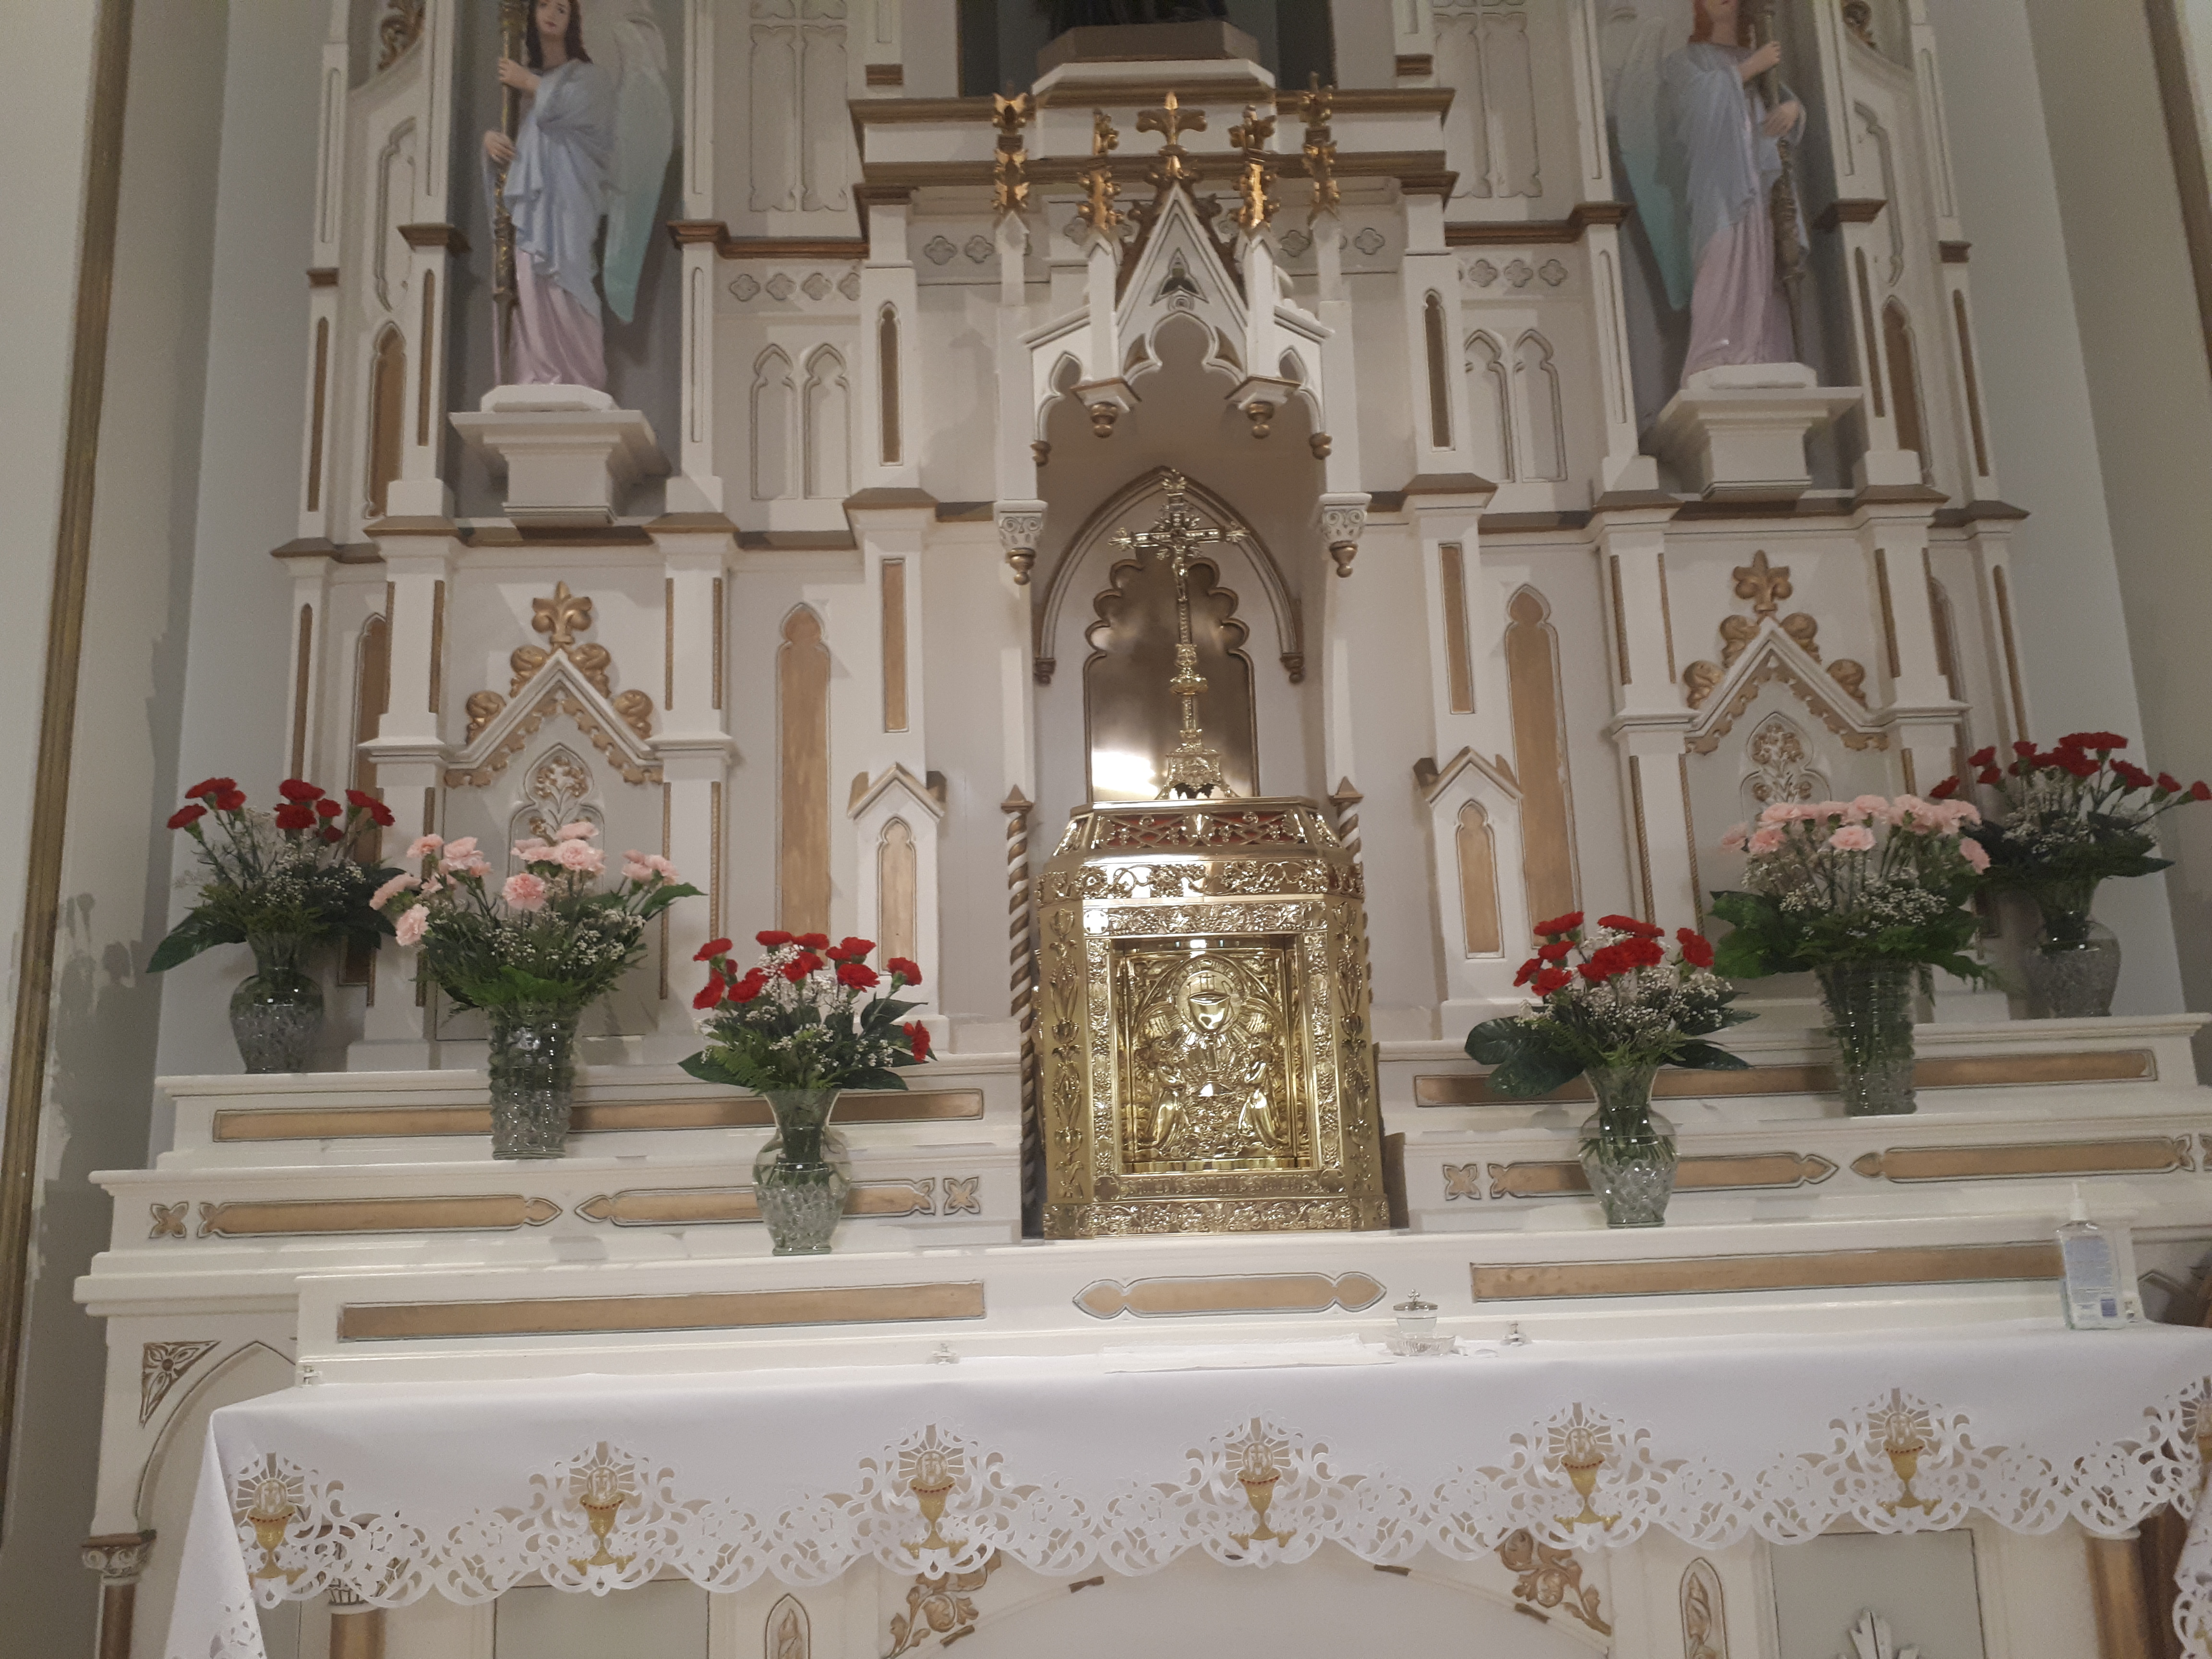 The altar with the tabernacle